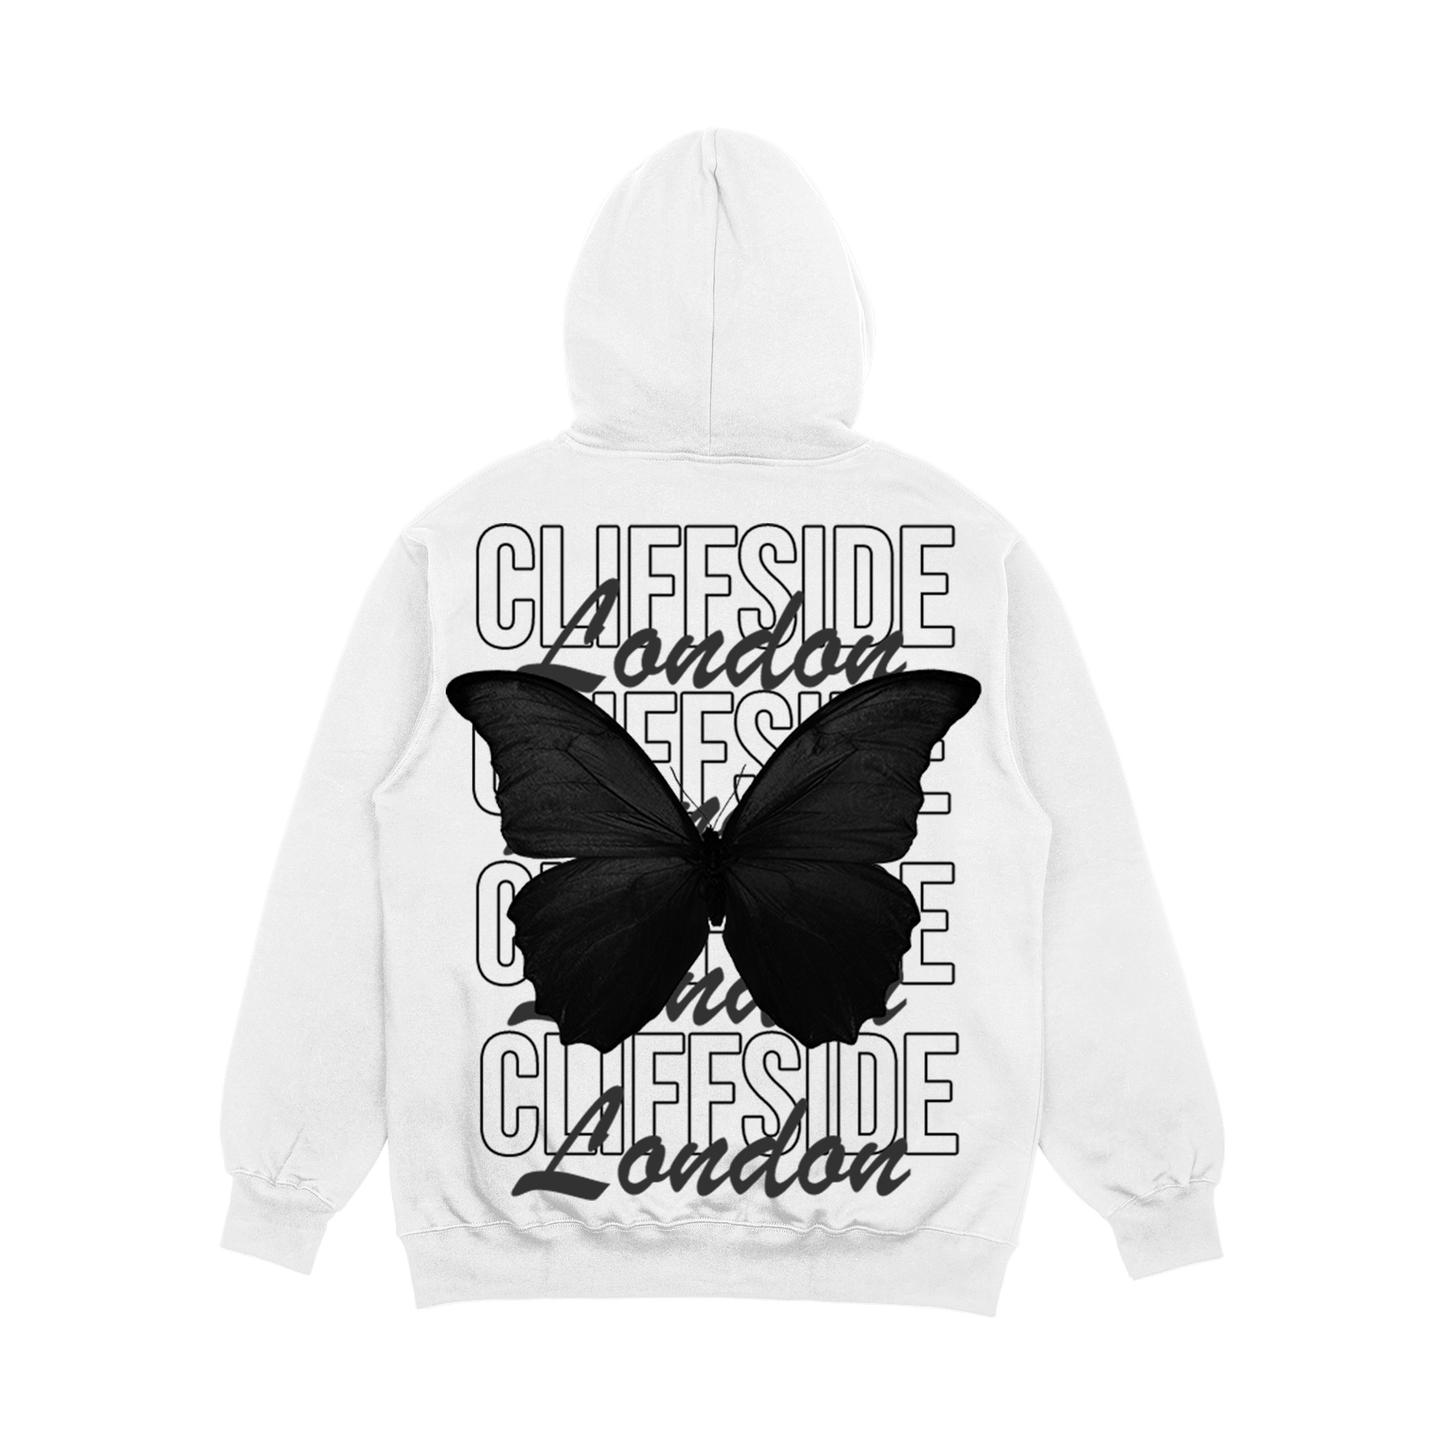 The Grayscale CliffSide “🦋 Butterfly” Premium White Hoodie